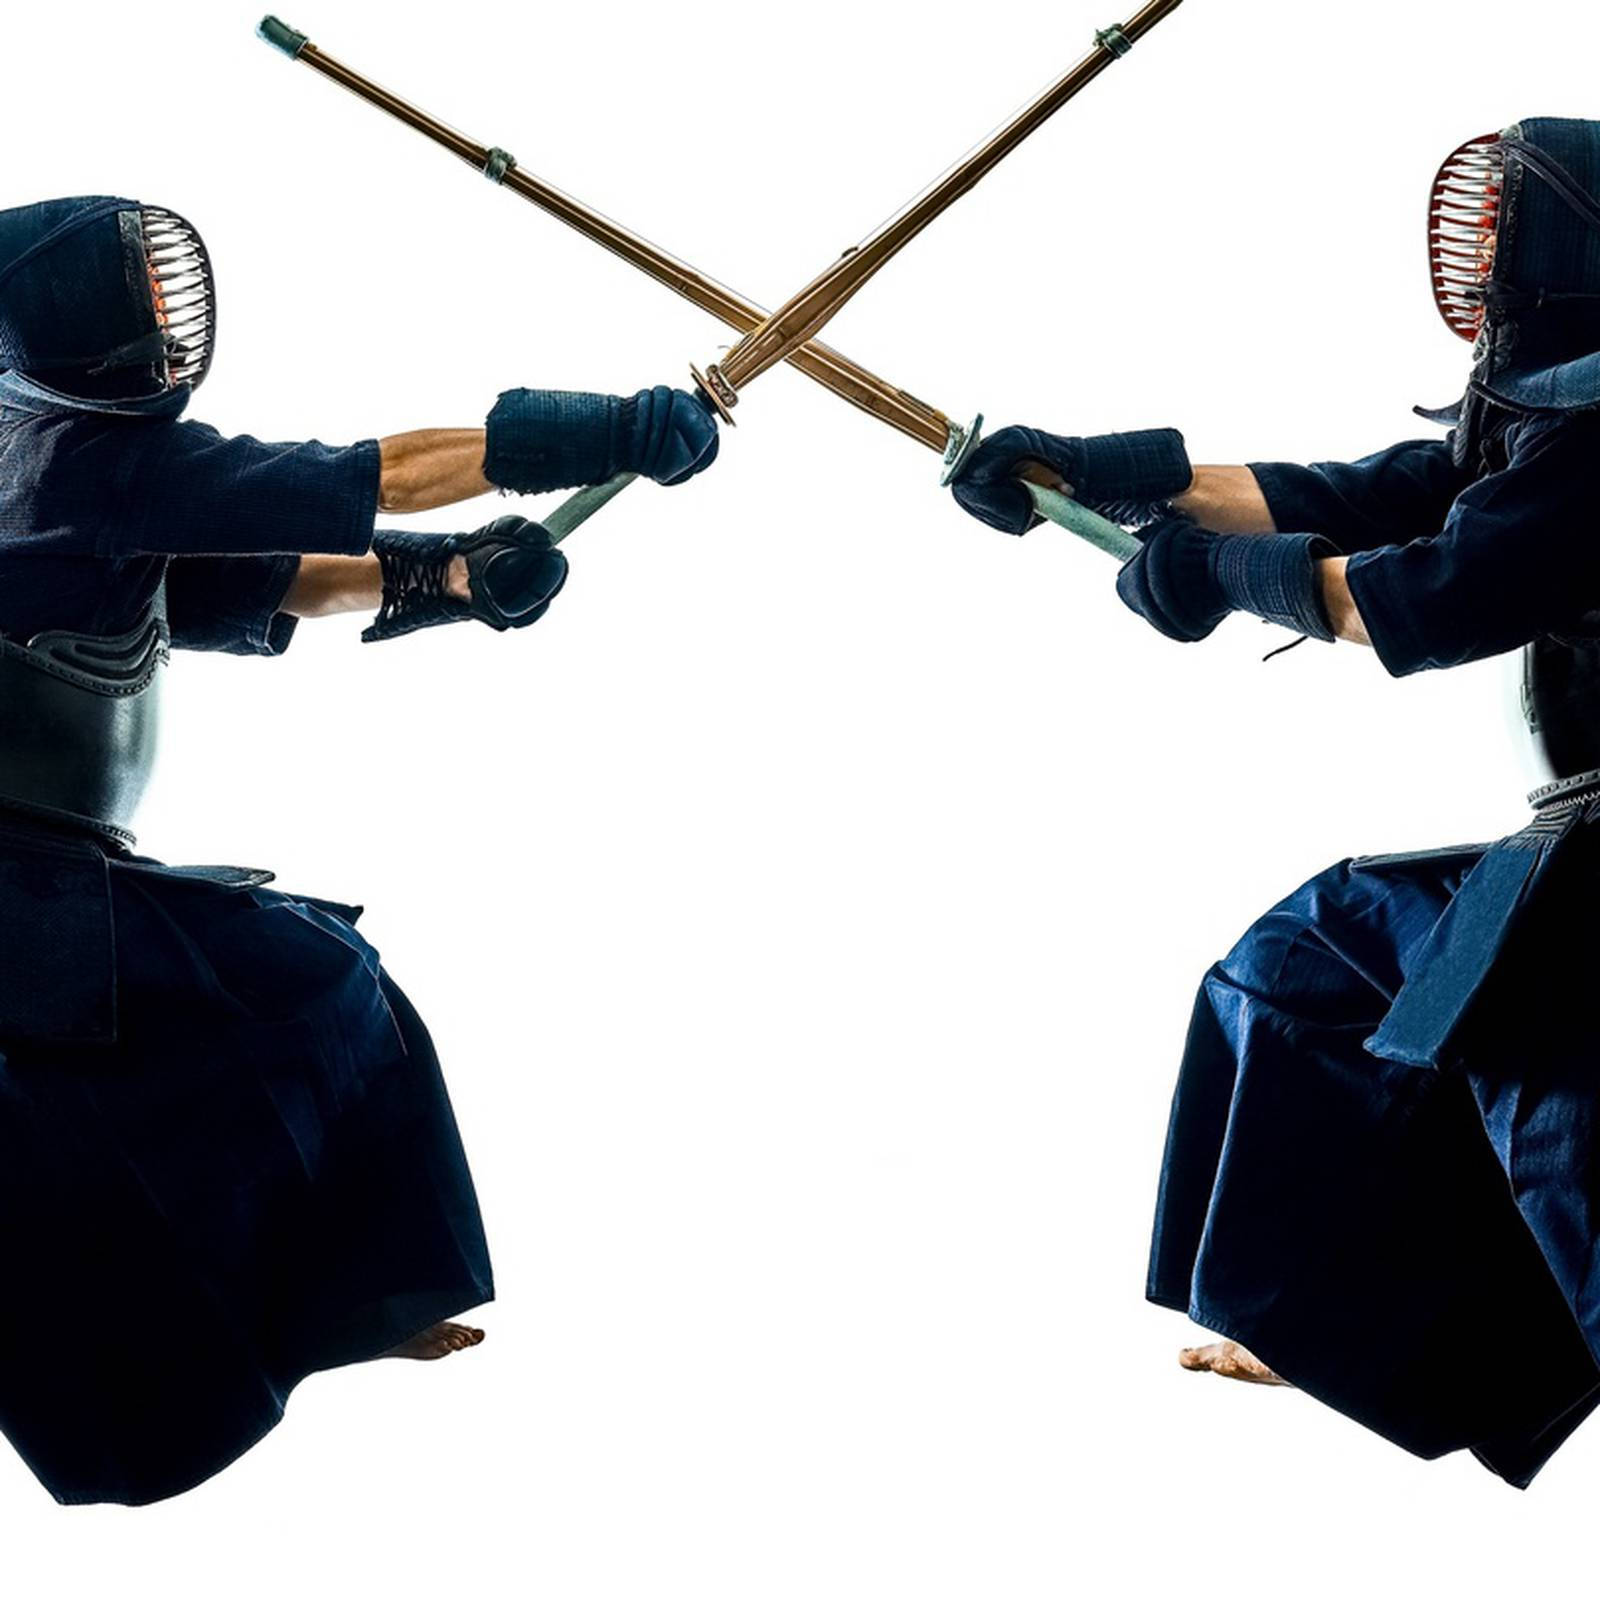 Strong Kendo Warrior Mid-move in Martial Arts Performance Wallpaper